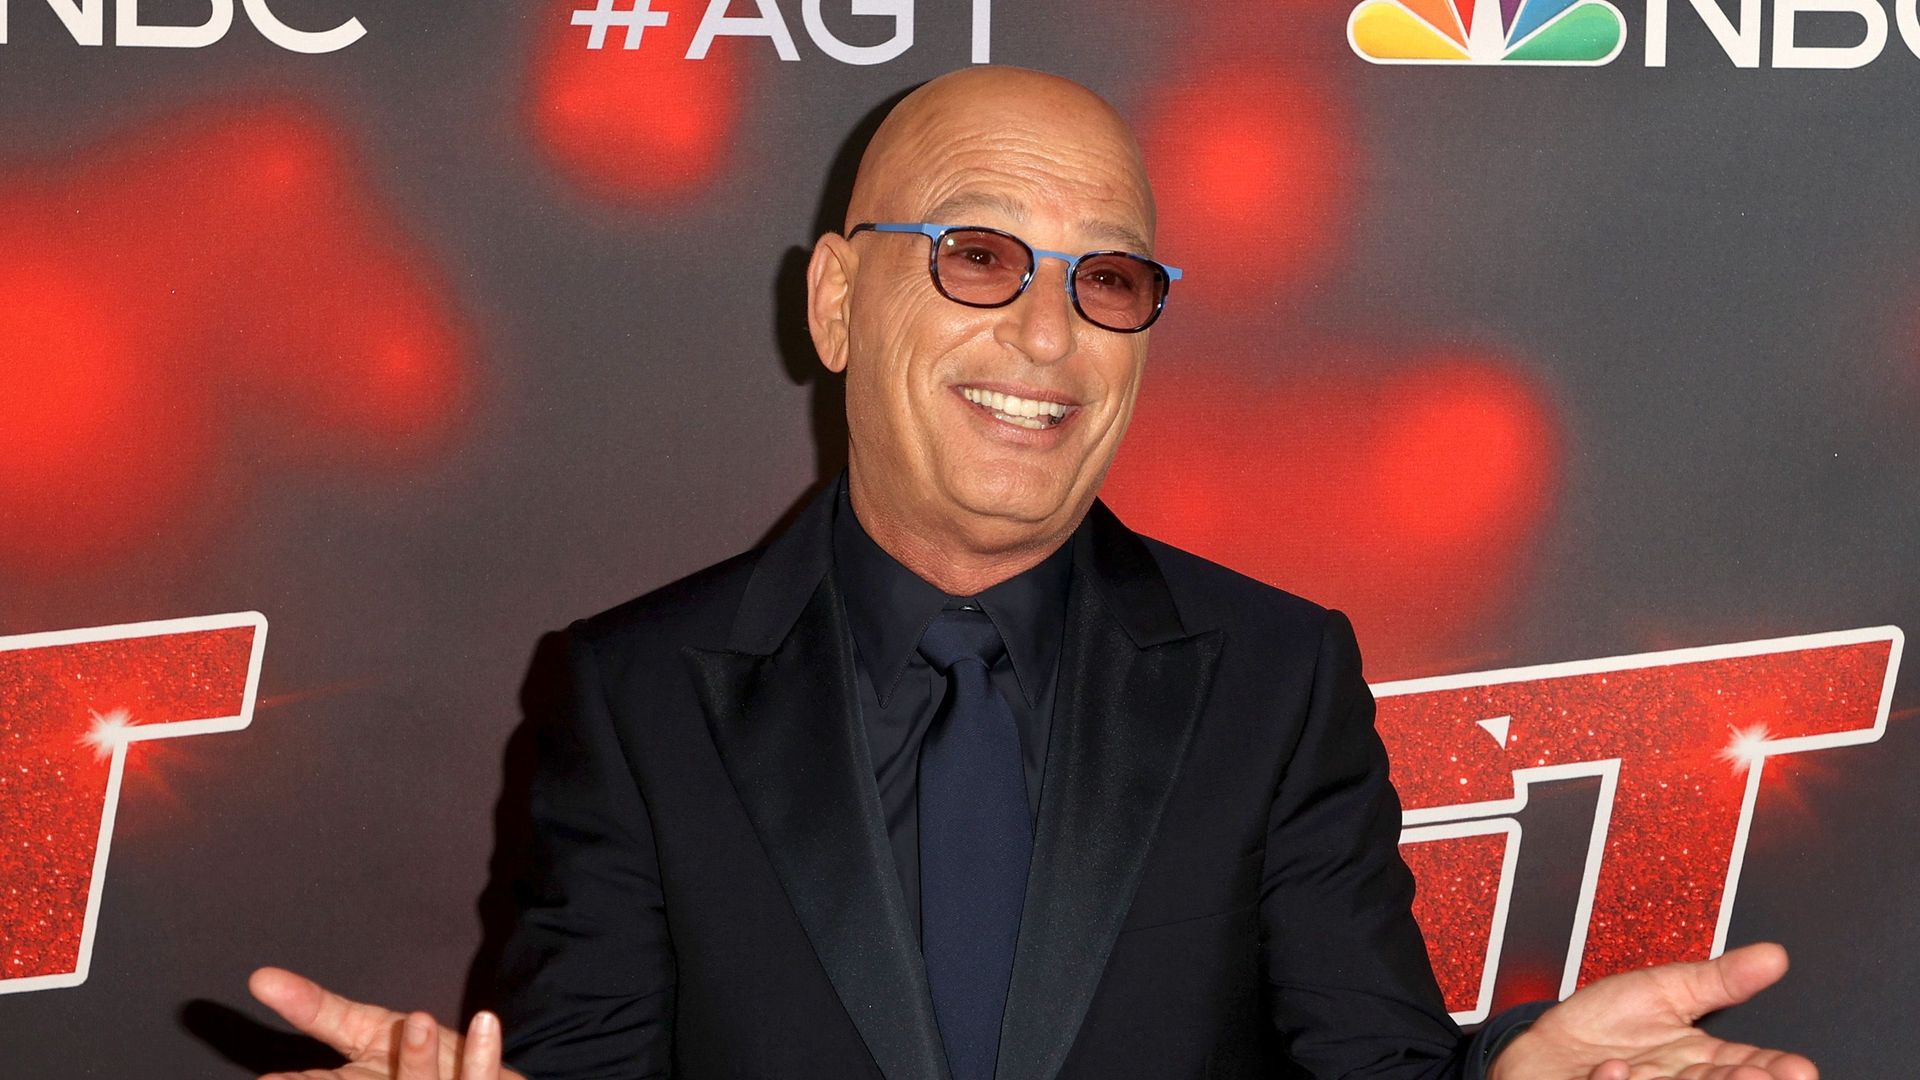 Howie Mandel attends "America's Got Talent" Season 16 Finale at Dolby Theatre on September 15, 2021 in Hollywood, California